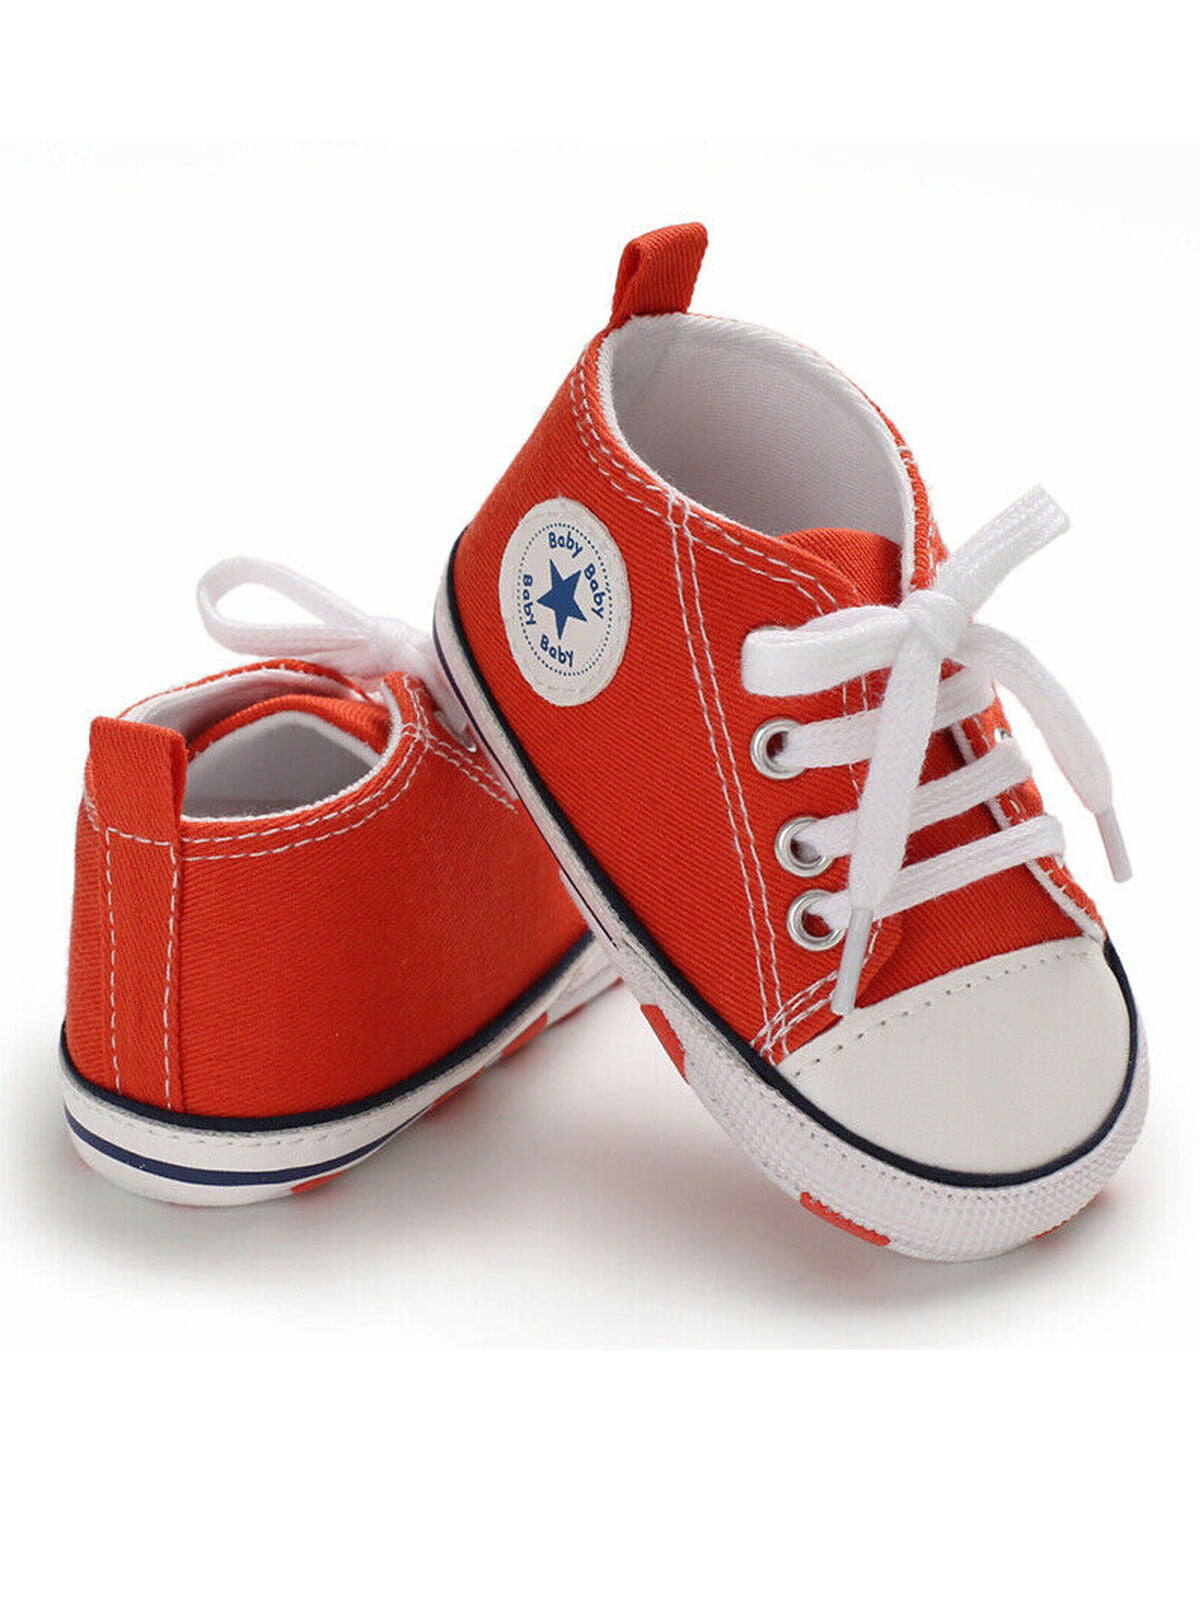 Baby Girls Crib Shoes Soft Soled Walker Casual Shoes 0-18 Months Wht Red Dots 